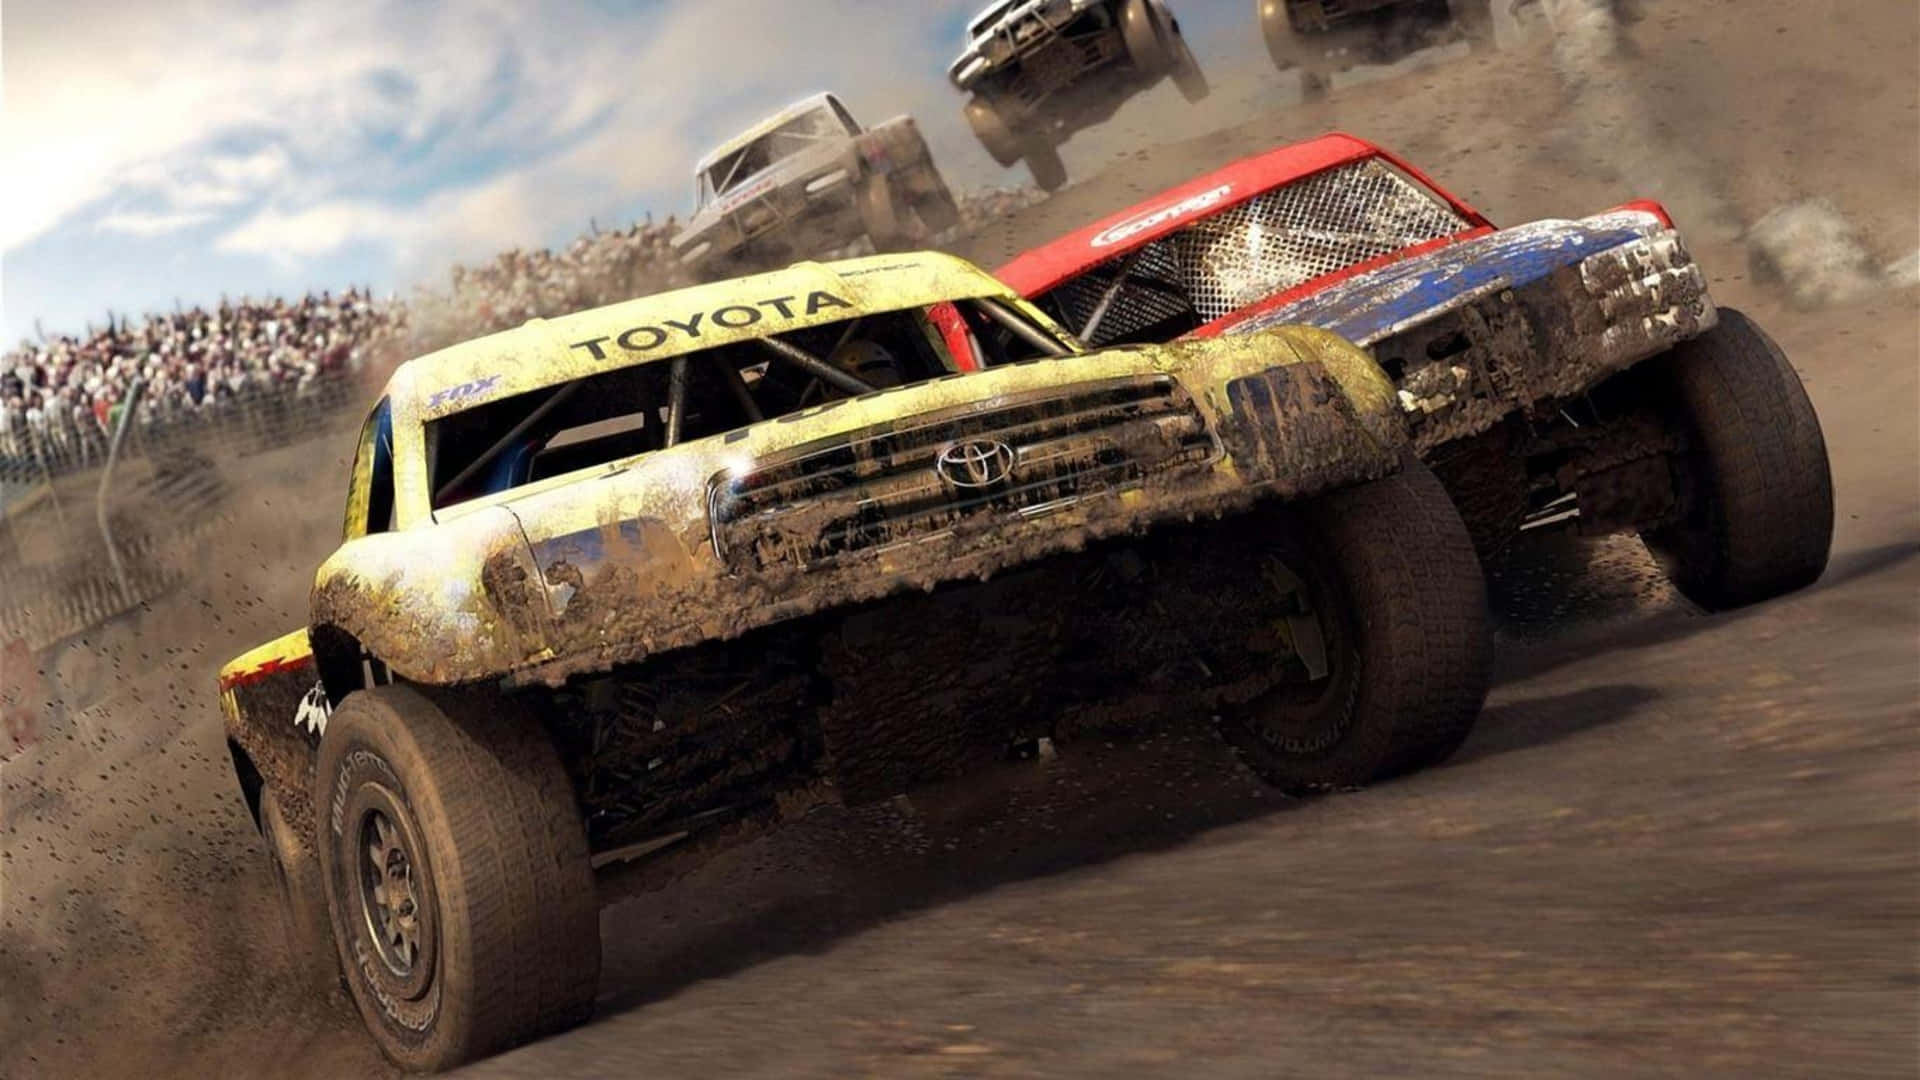 Getting behind the wheel of dirt 3 never felt so real